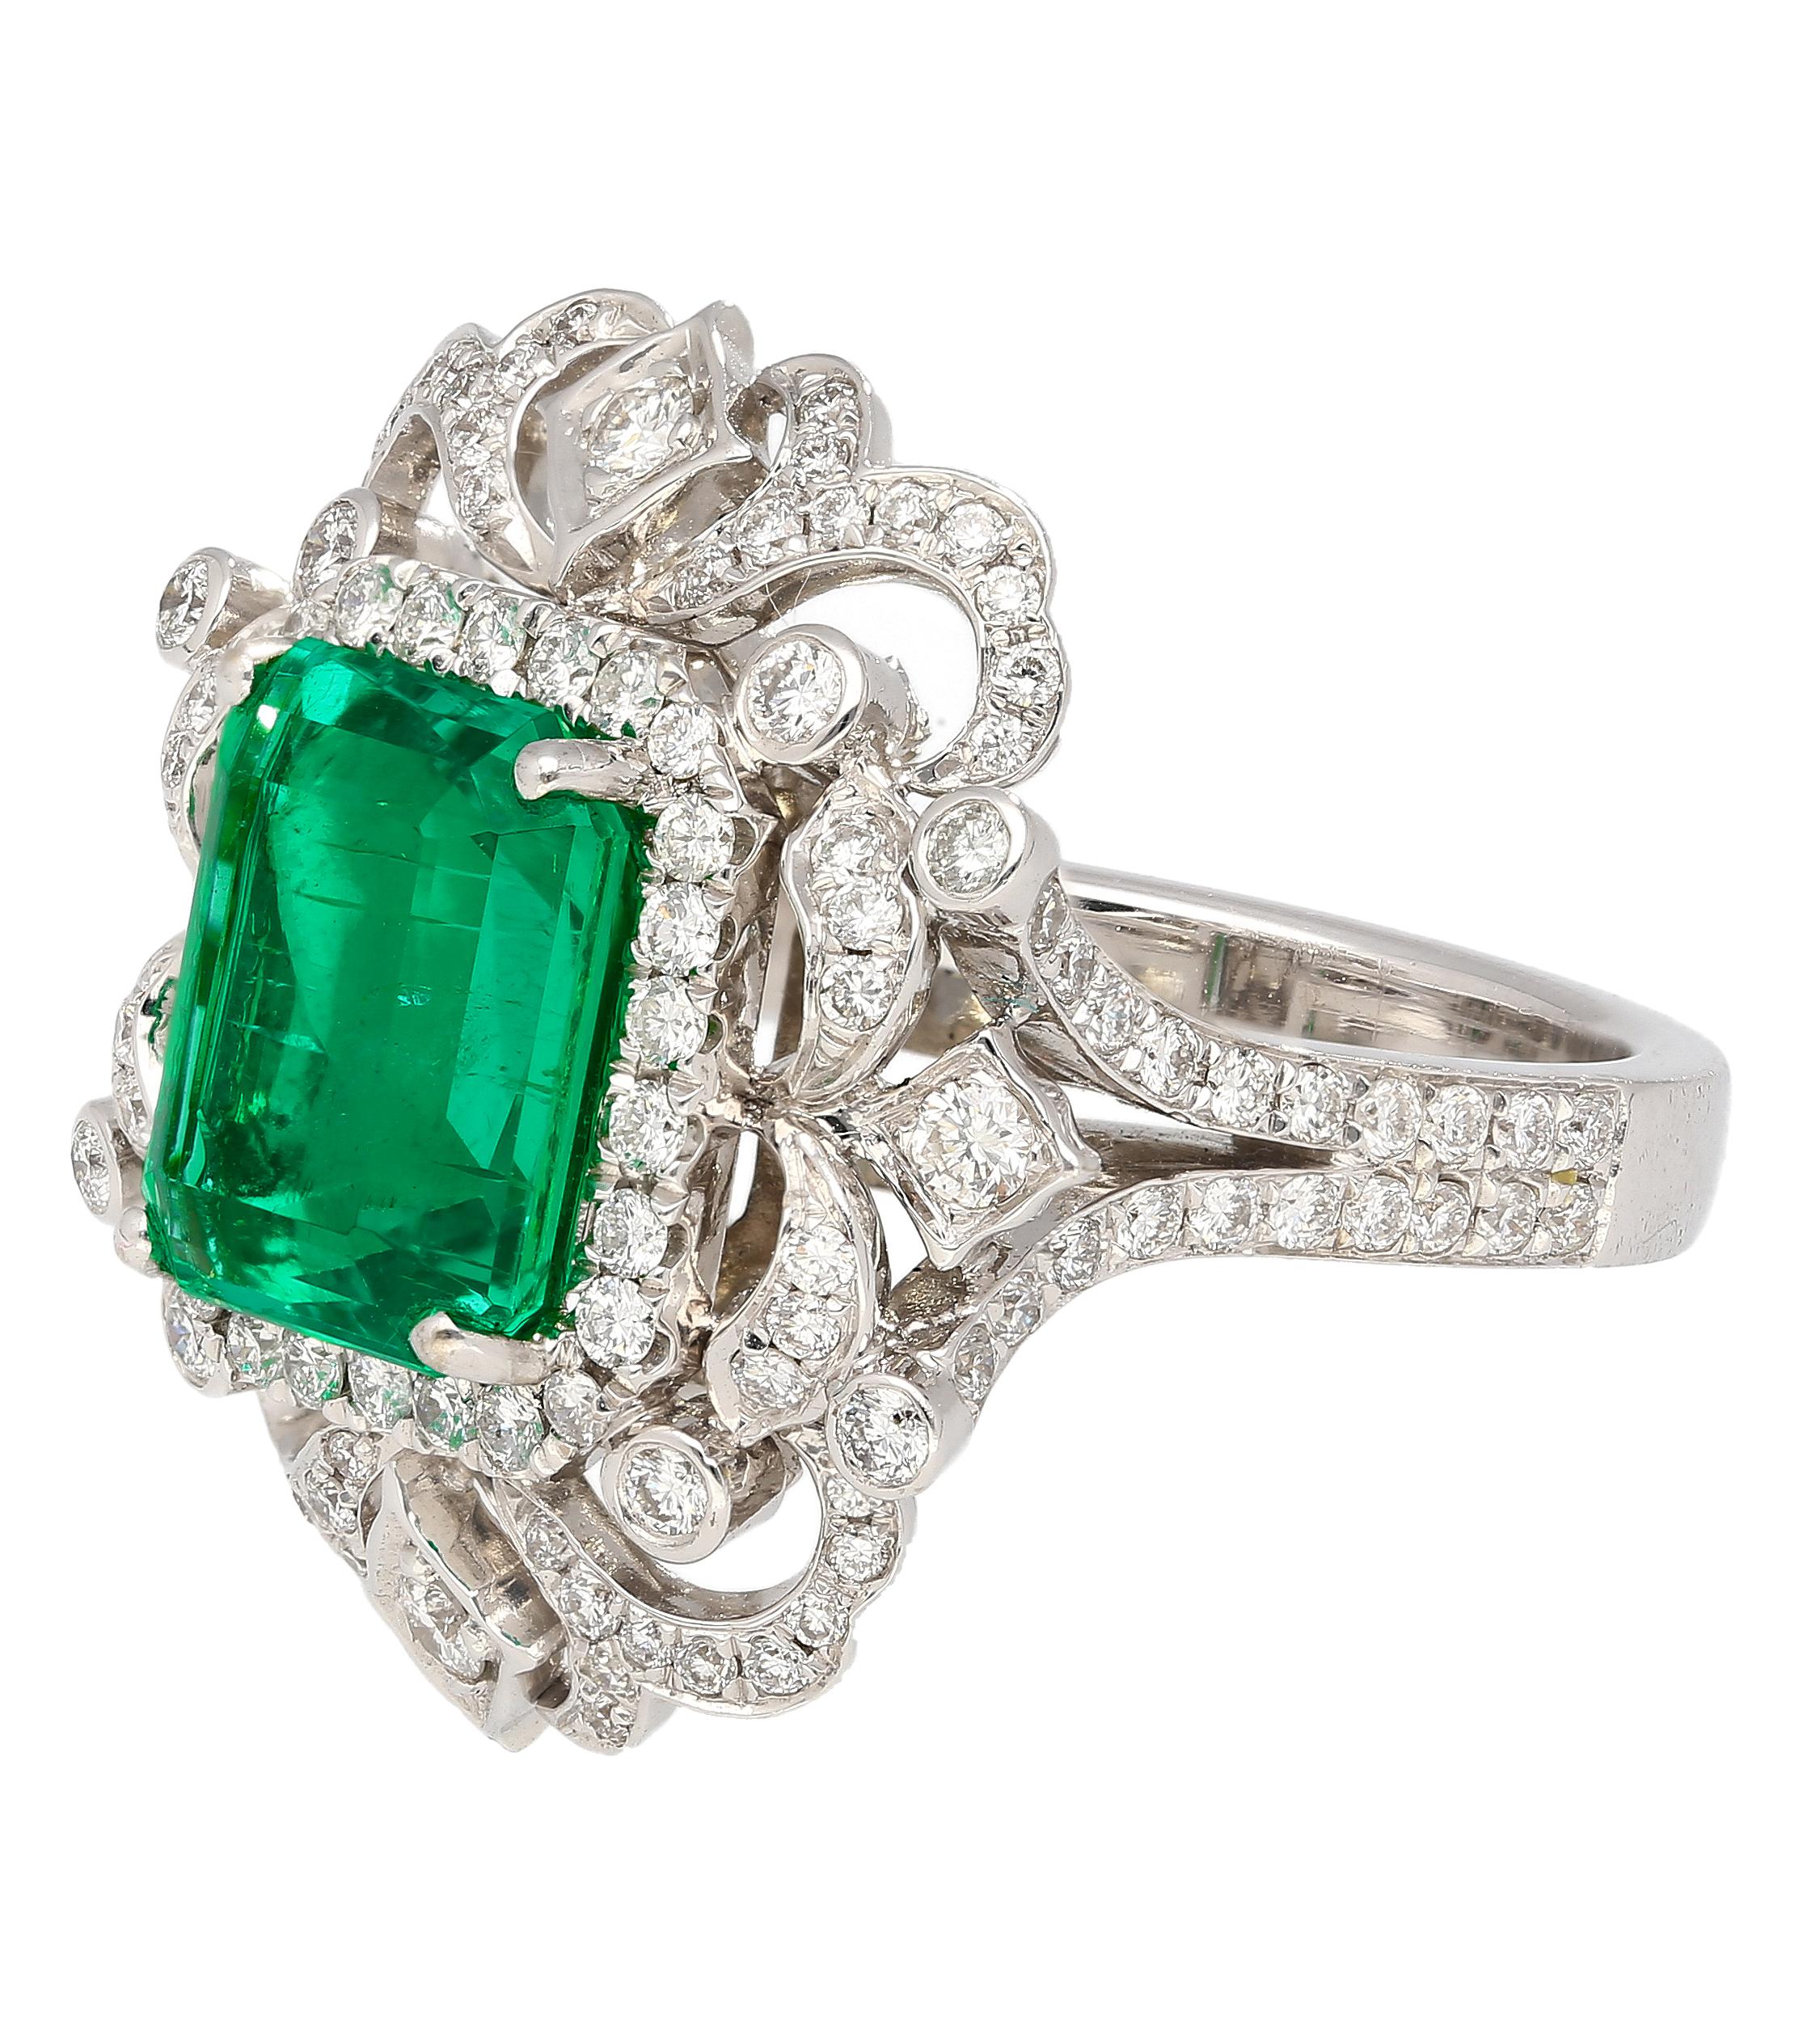 GIA Certified 3.75 Carat Colombian Emerald in 18k White Gold Art Deco Ring In New Condition For Sale In Miami, FL